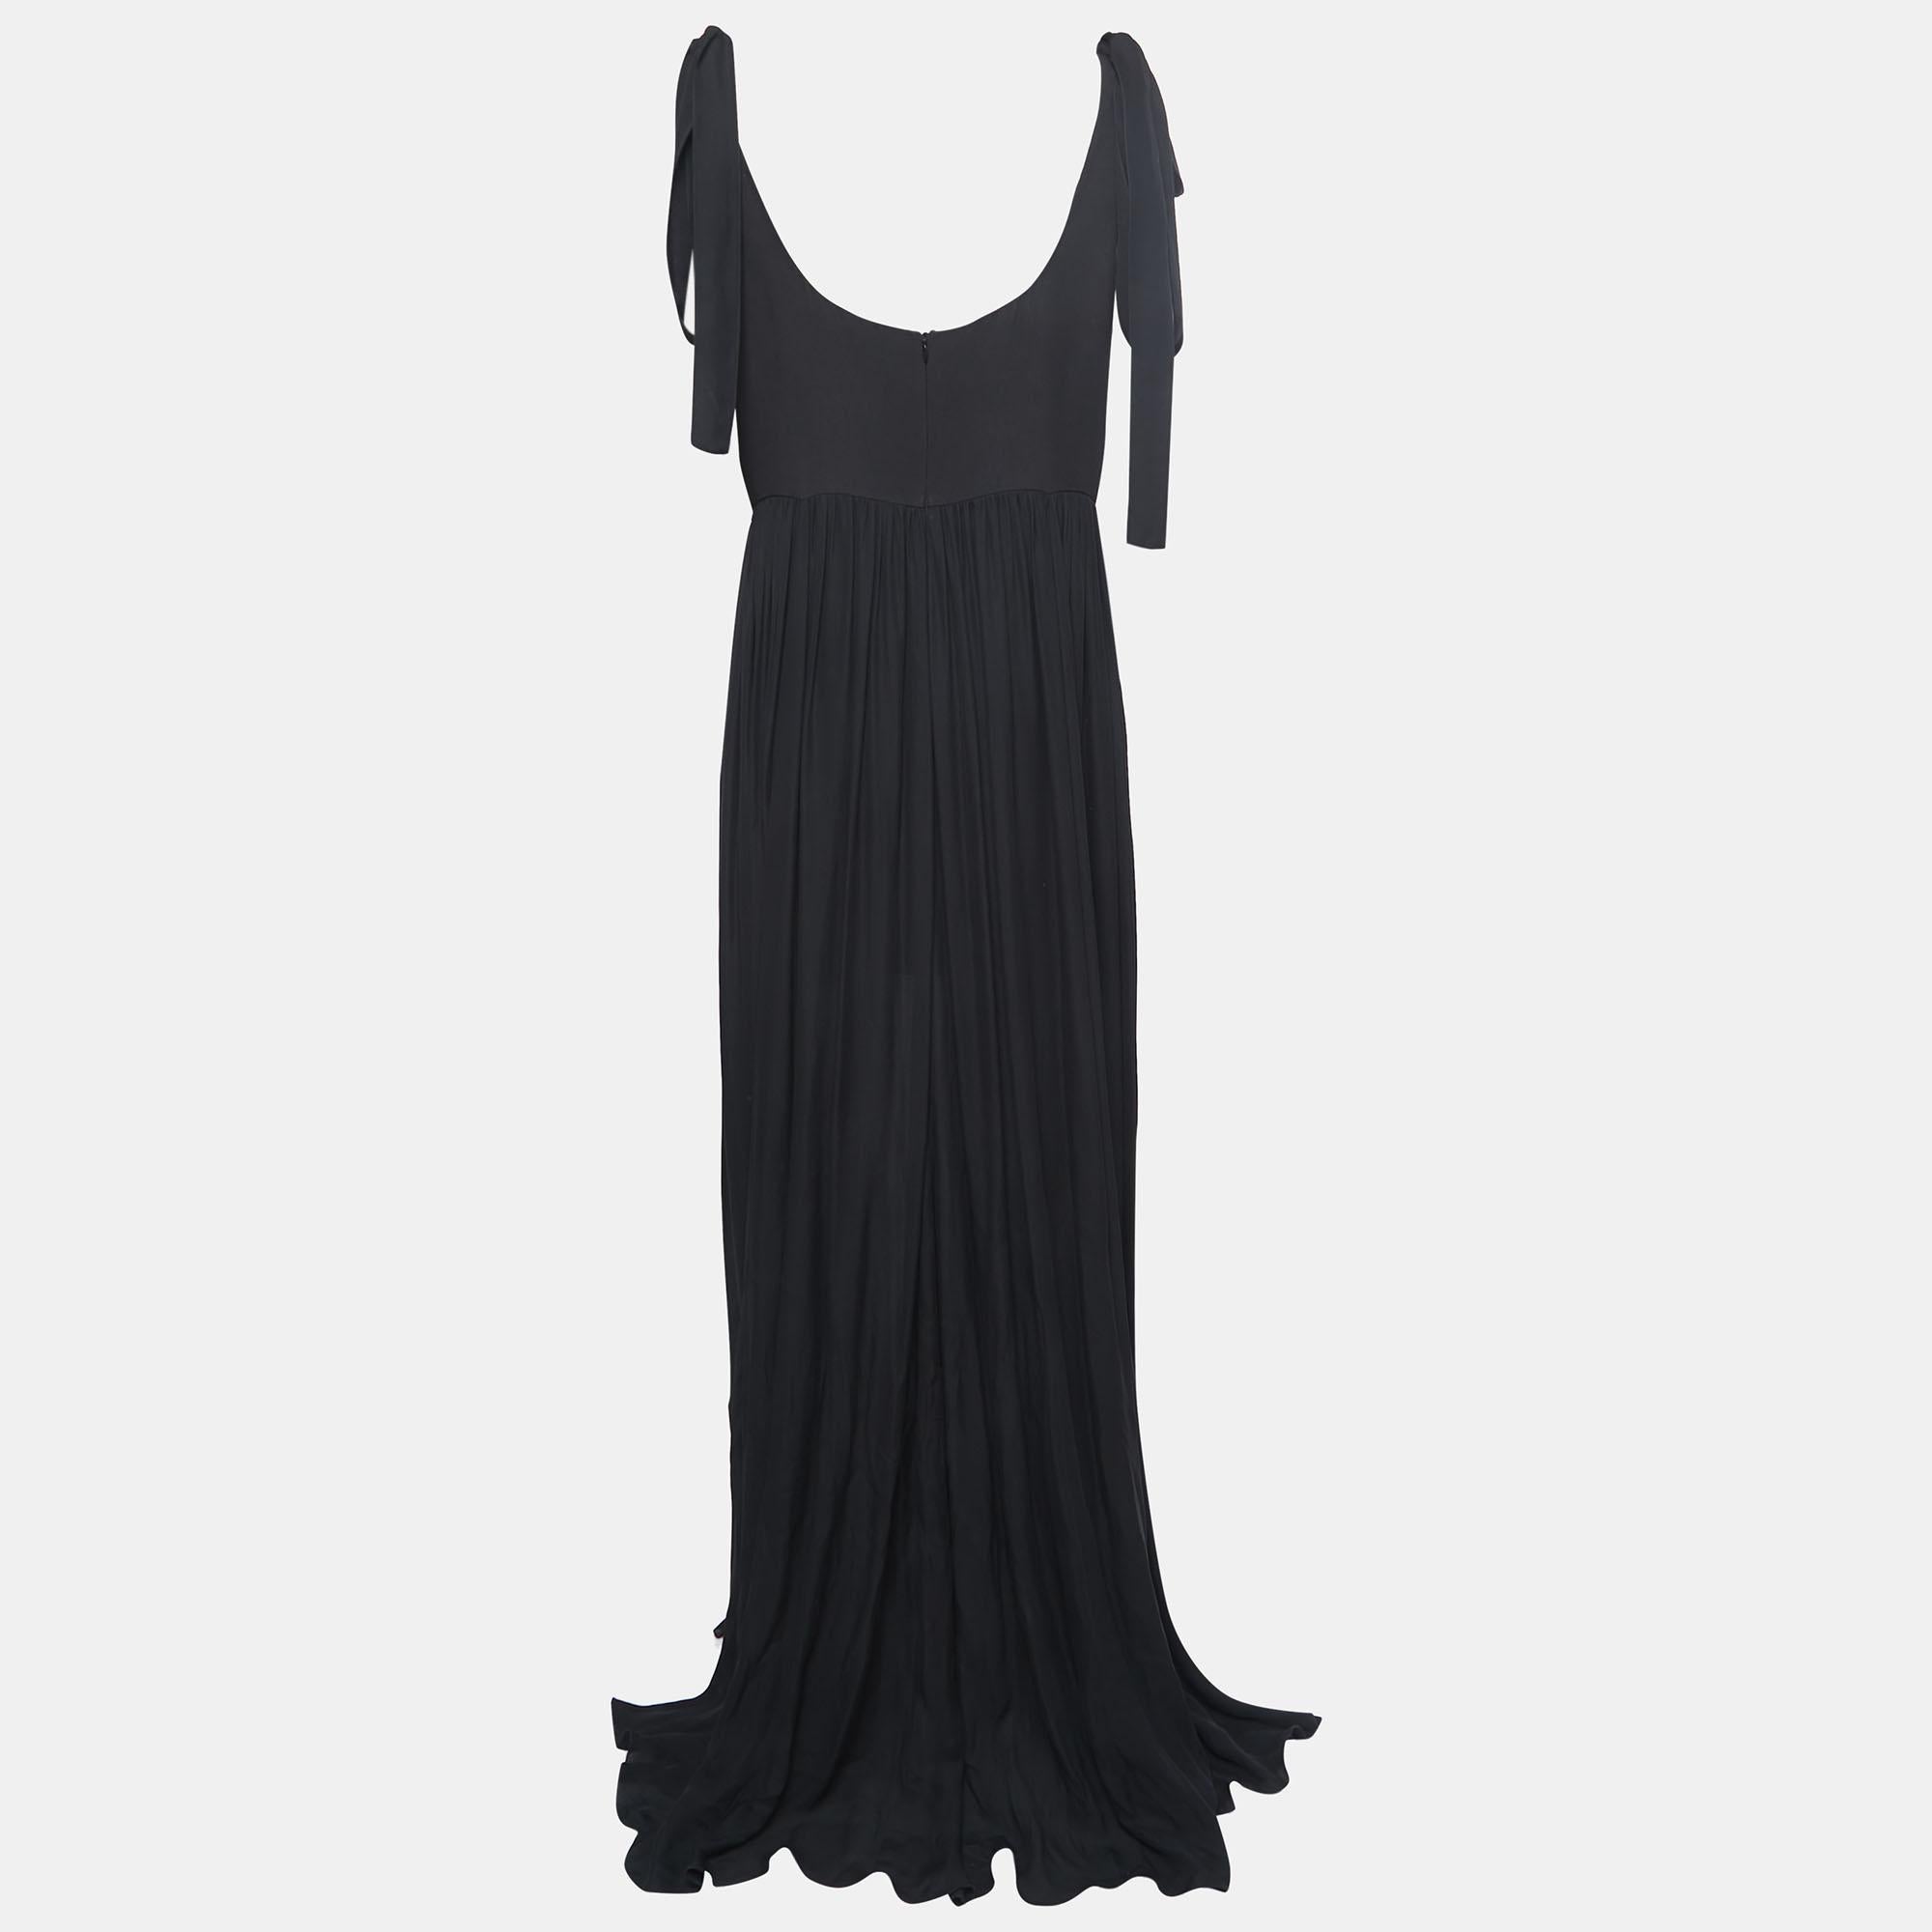 This Elie Saab maxi dress is an absolutely dreamy piece. Featuring an embellished front and a sweeping hemline, this dress is sure to spark joy!

Includes: Tag, Extra embellishments